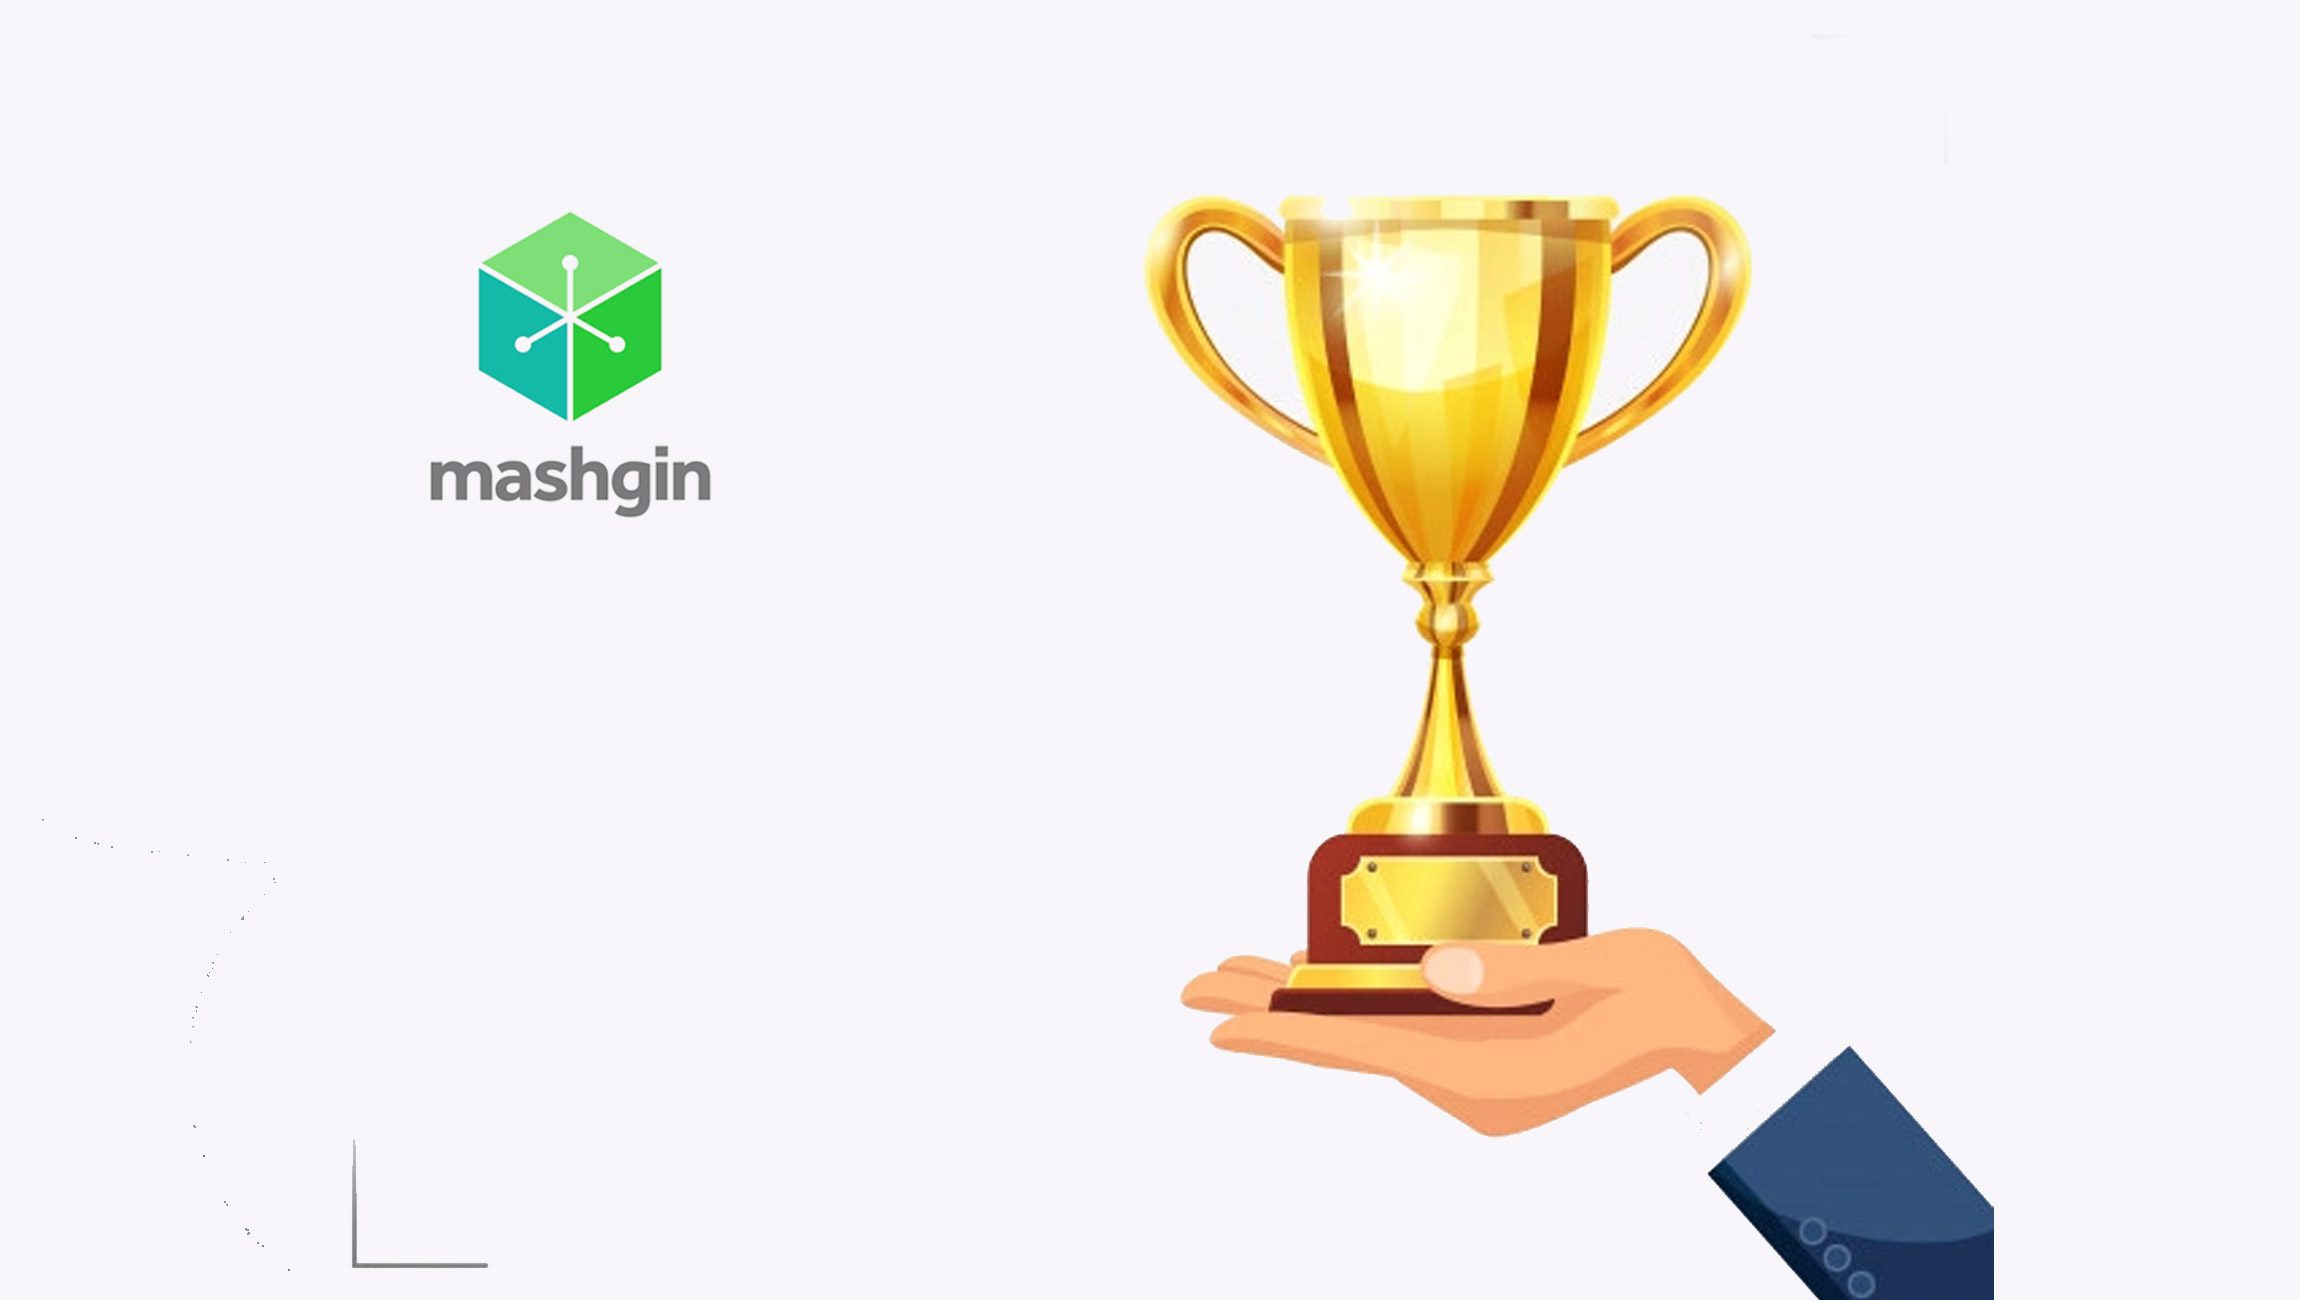 Mashgin Wins Gold Edison Award For Its AI-Powered Touchless Self-Checkout System